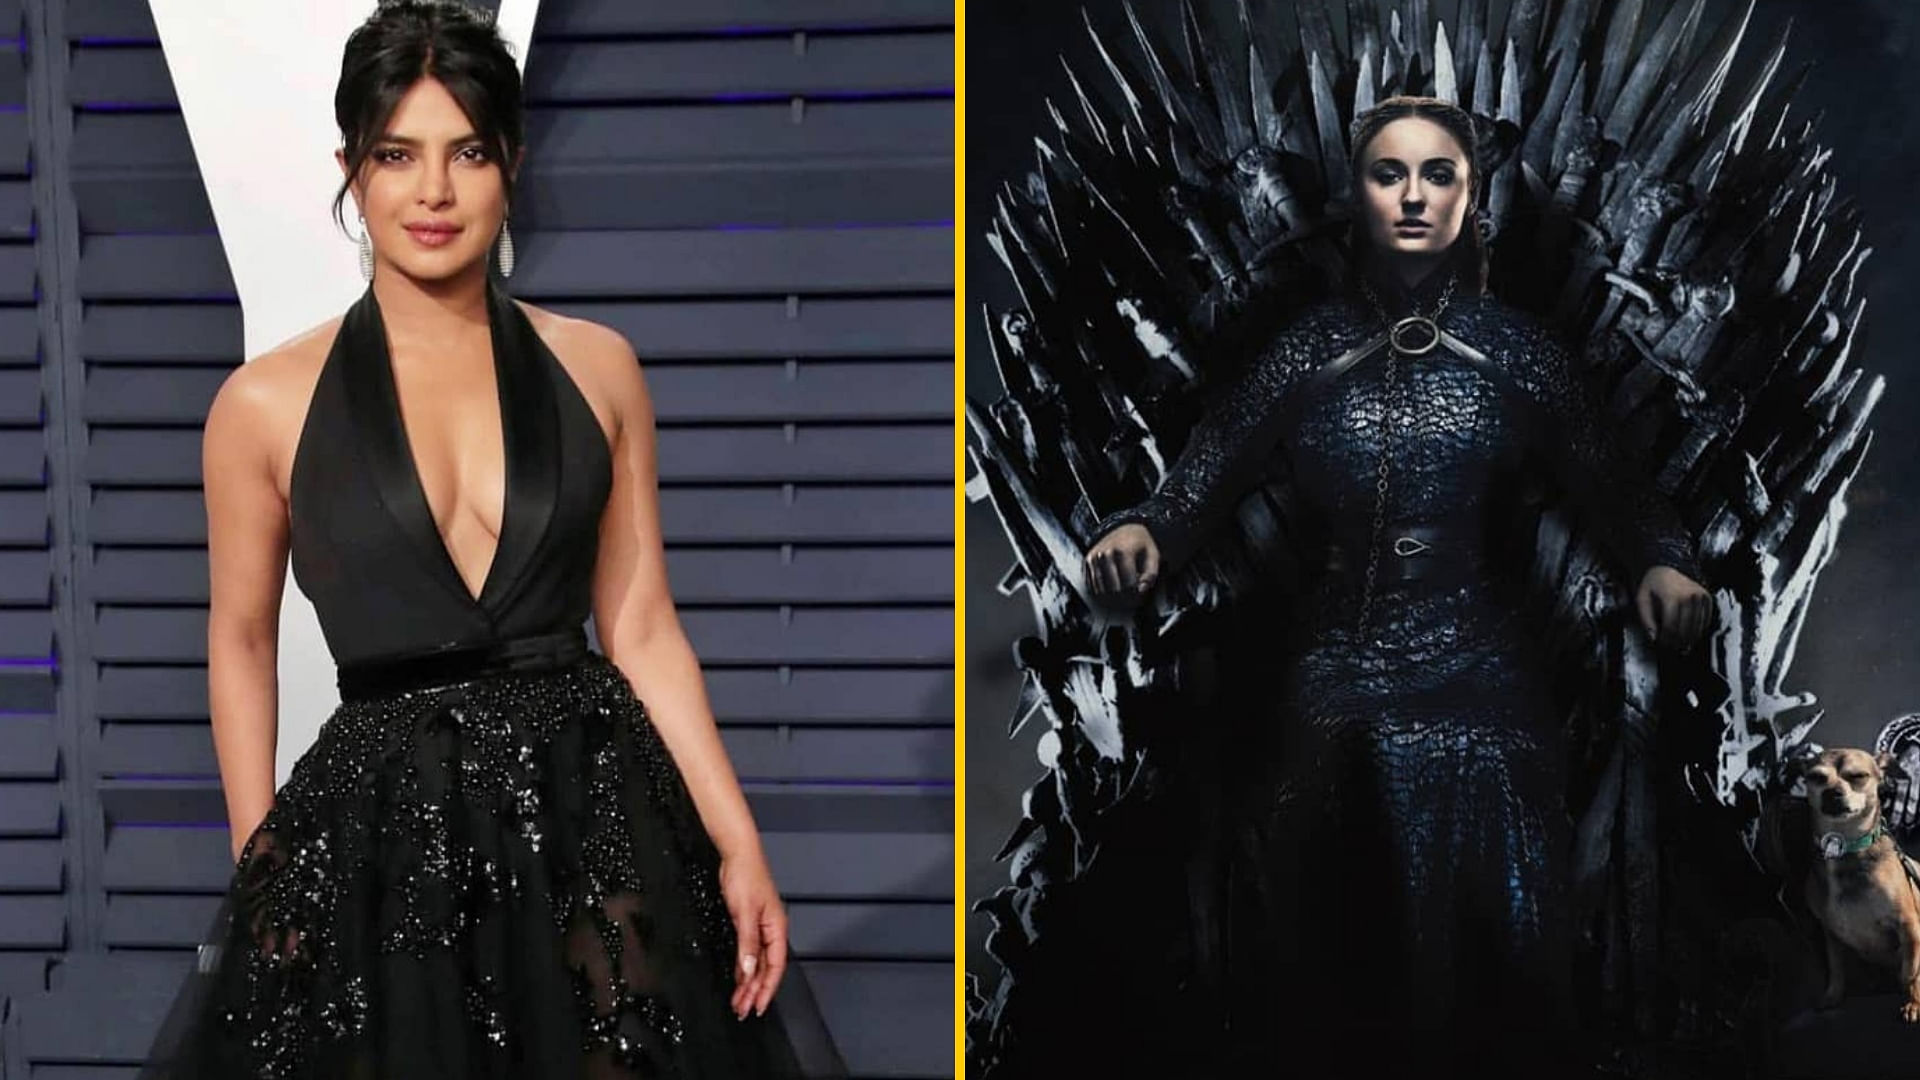 Priyanka Chopra wishes Sophie Turner luck for the season 8 premiere of <i>Game of Thrones</i>.